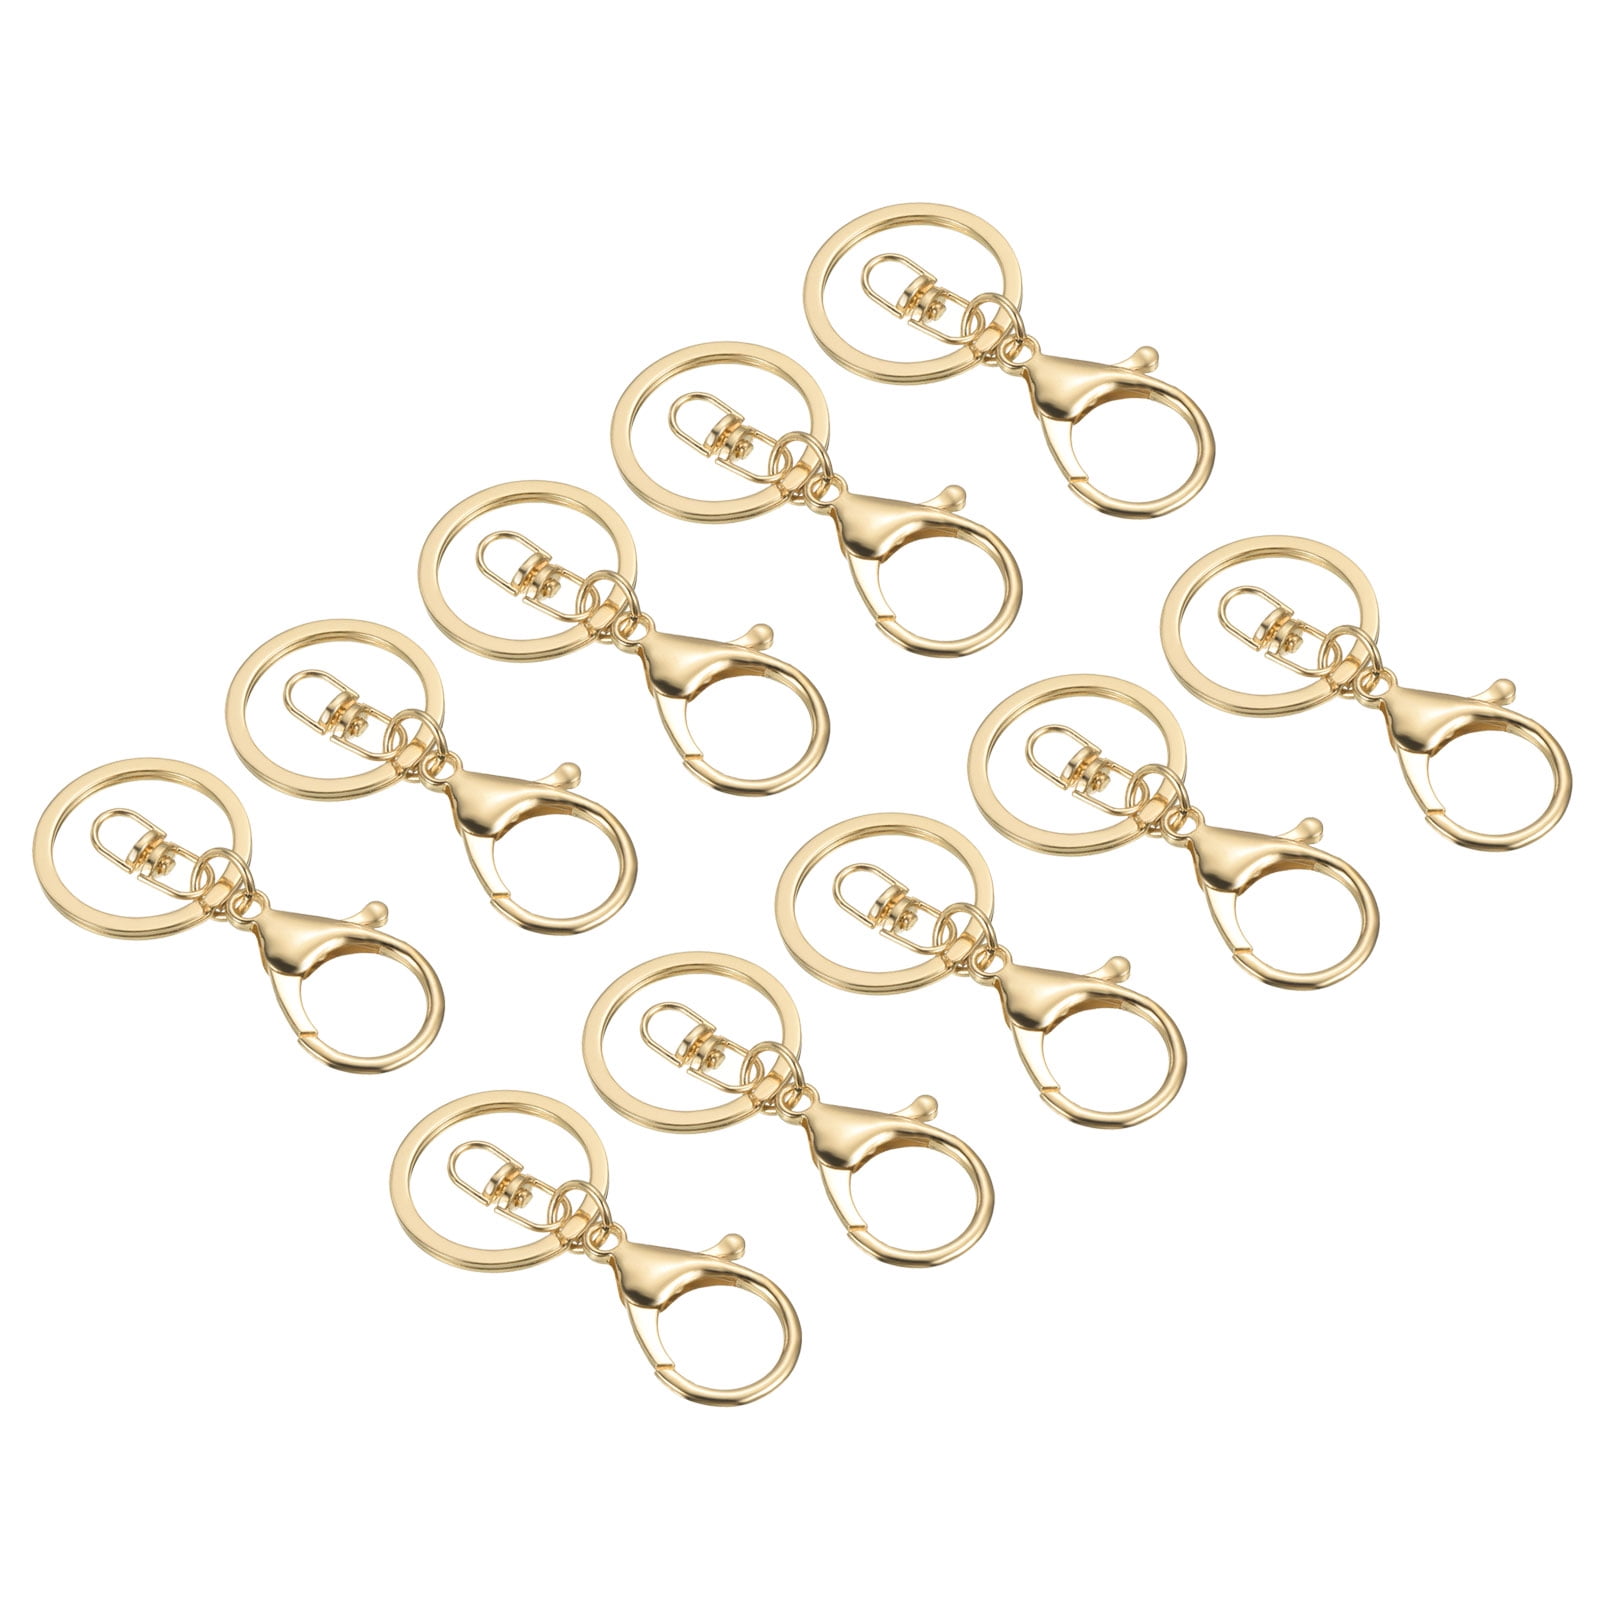 SmartPartsCrafts 10 Large Rose Gold Keychains with Clasp, Lobster Clasp, Swivel Key Chain Clasp for Adding Lanyards, Purses, Add Your Own Charms, fin0642